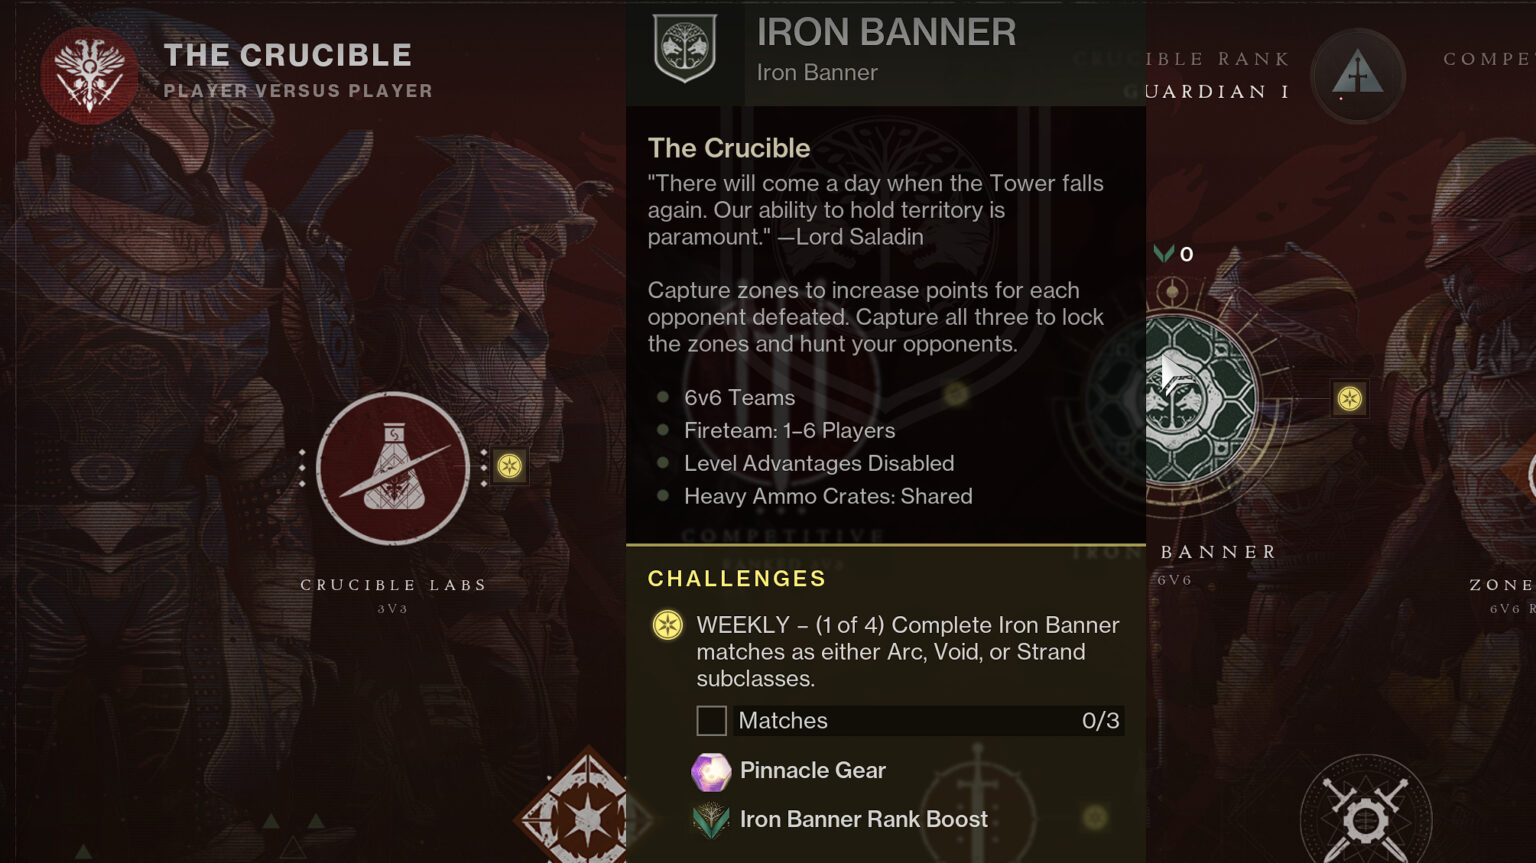 Destiny 2 Iron Banner Schedule, Challenges and more